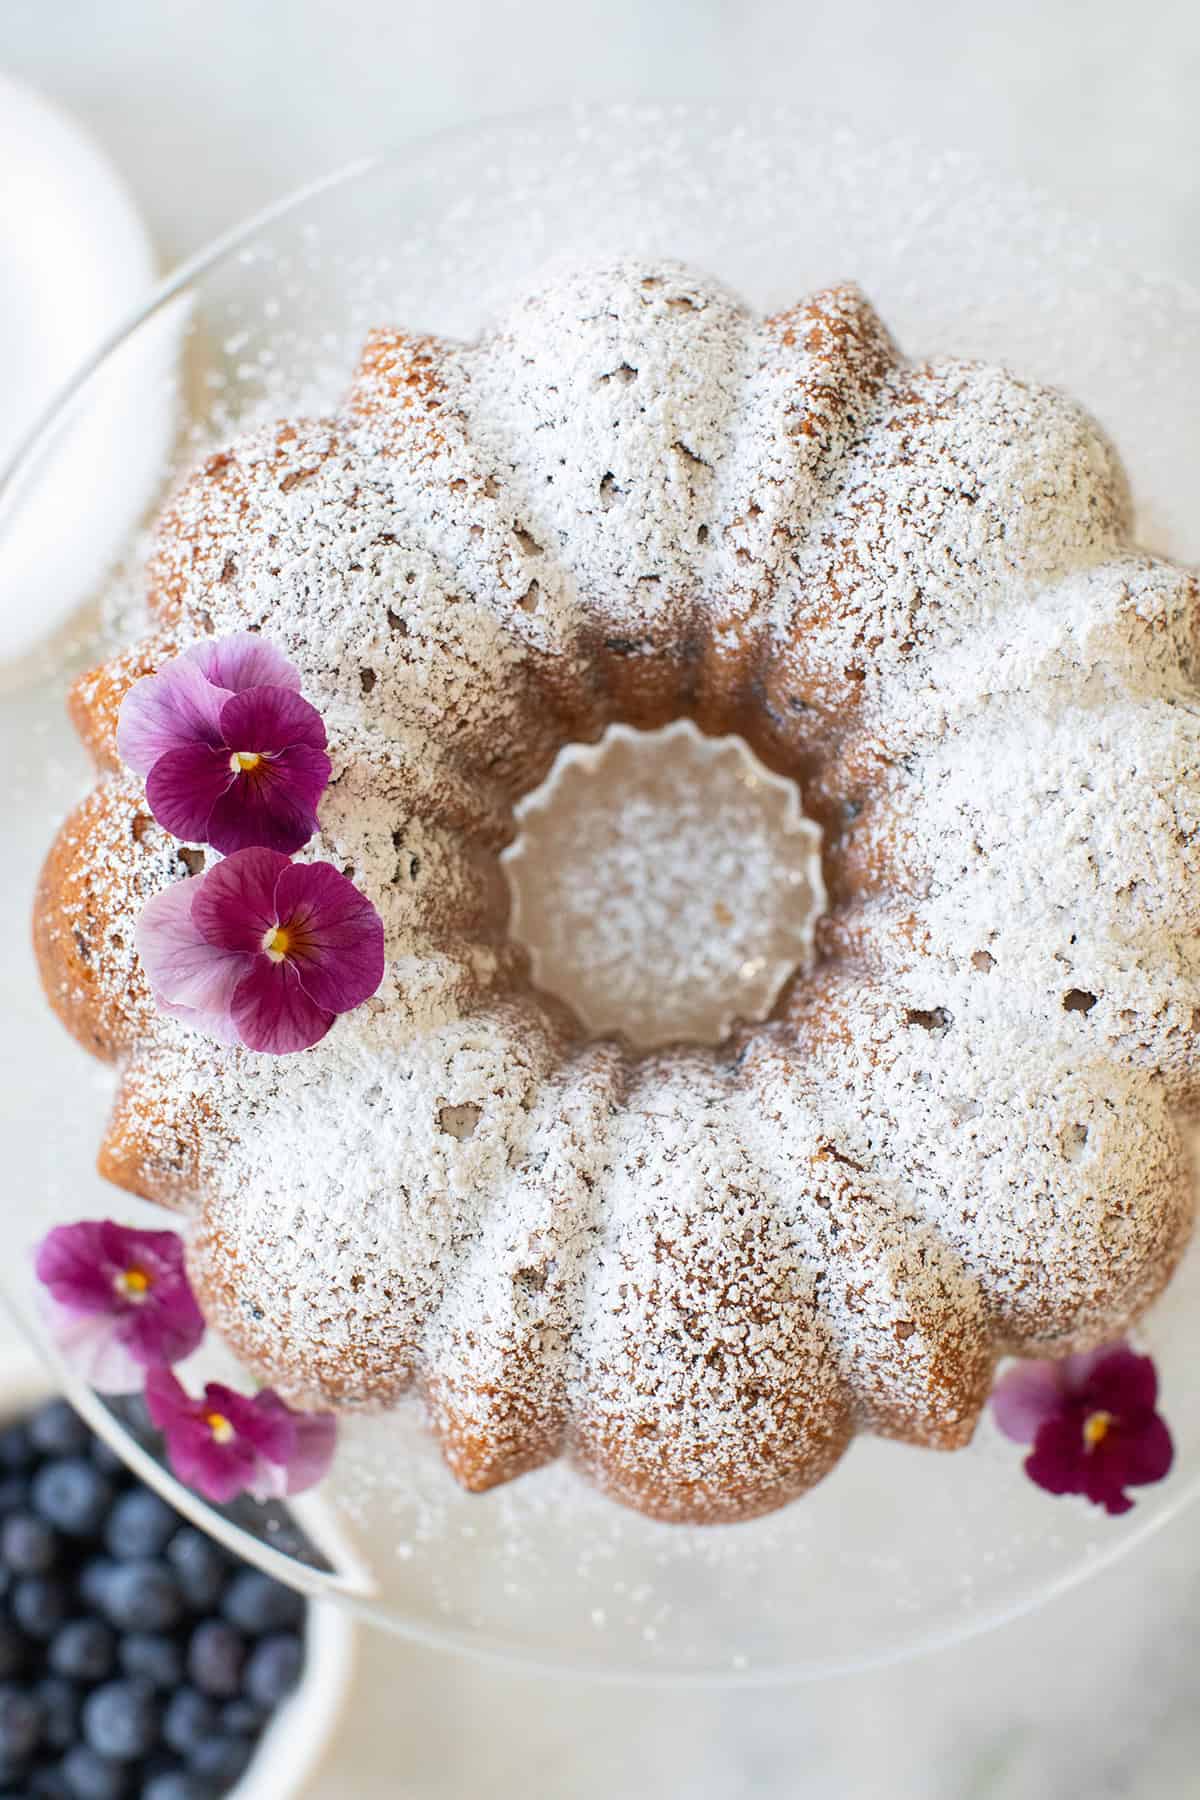 Bundt cake made with wild-dried blueberries with a dusting of powdered sugar.